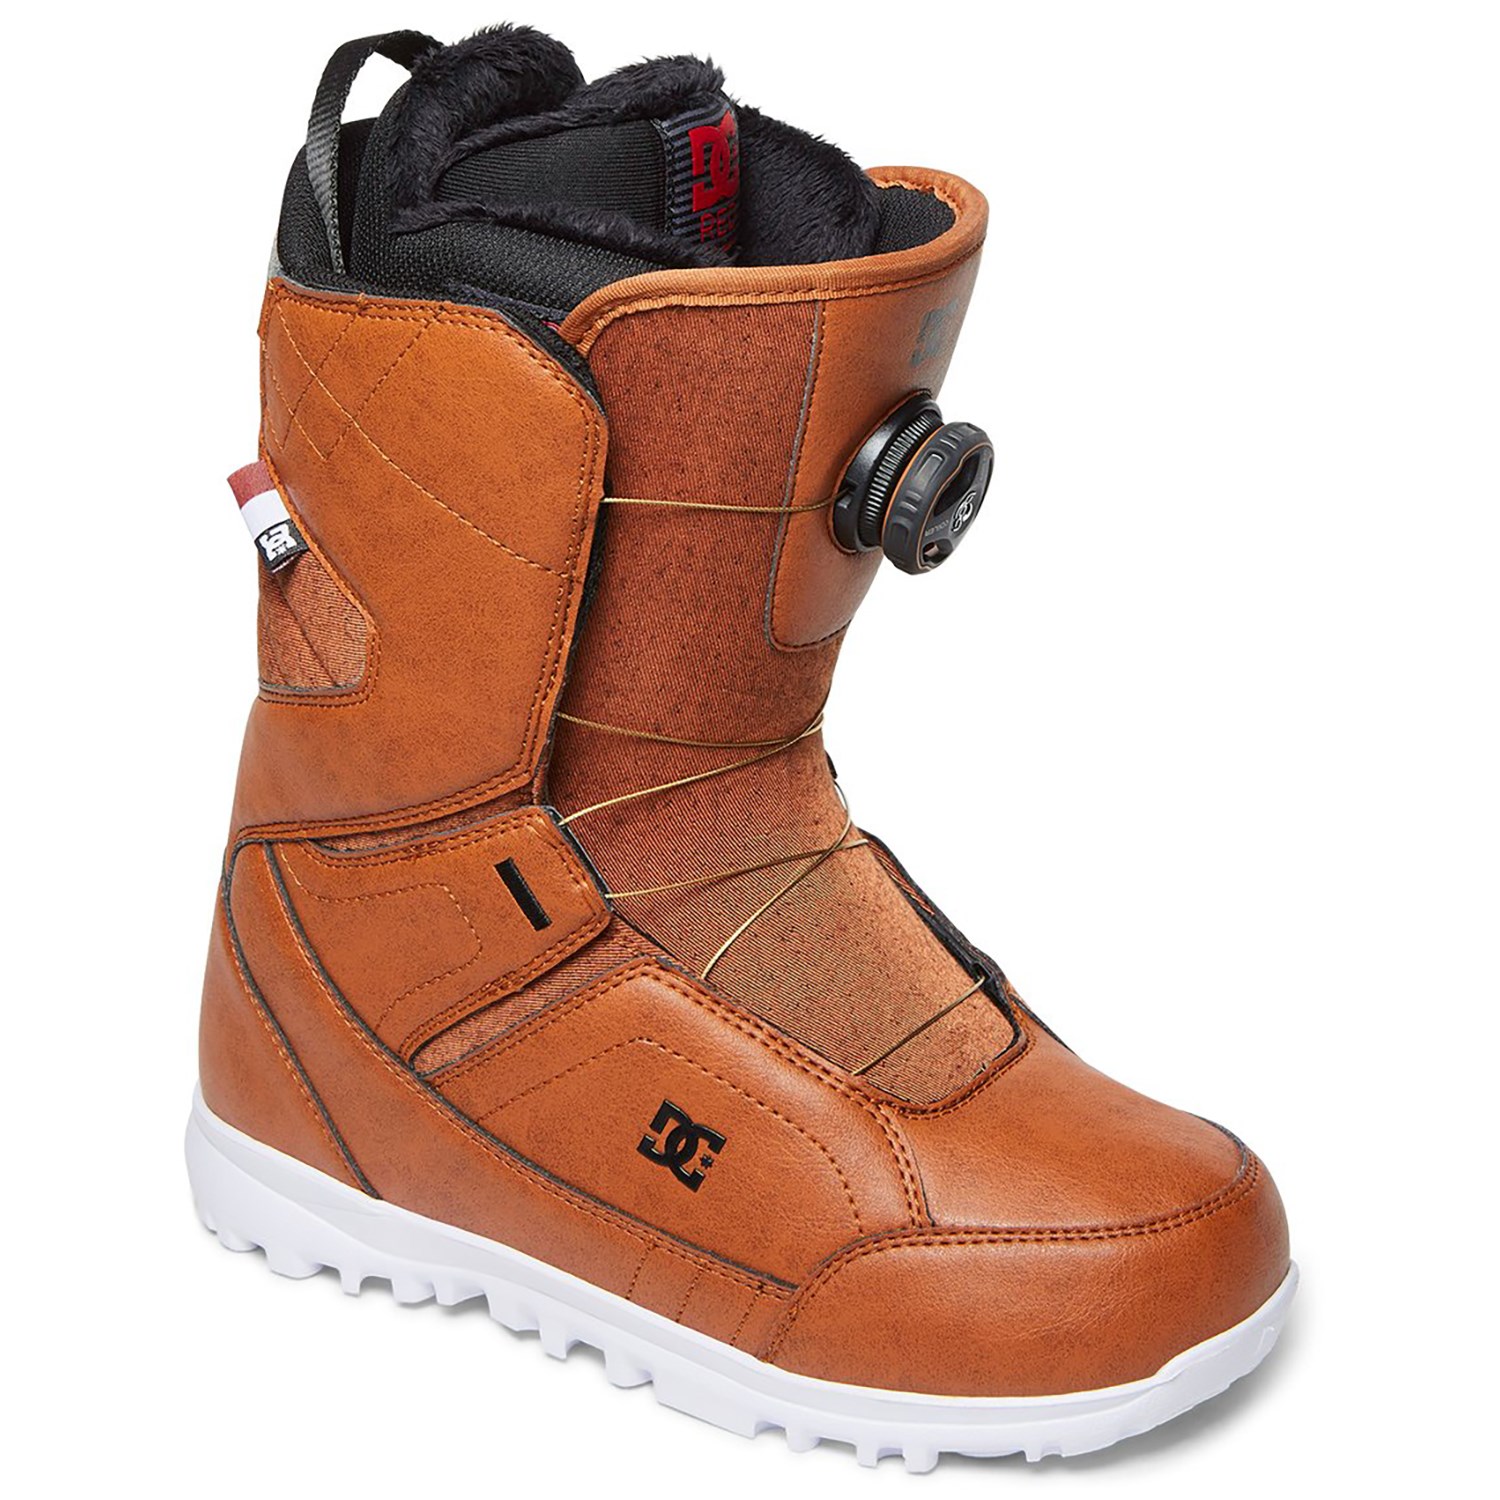 DC Search Snowboard Boots - Women's 